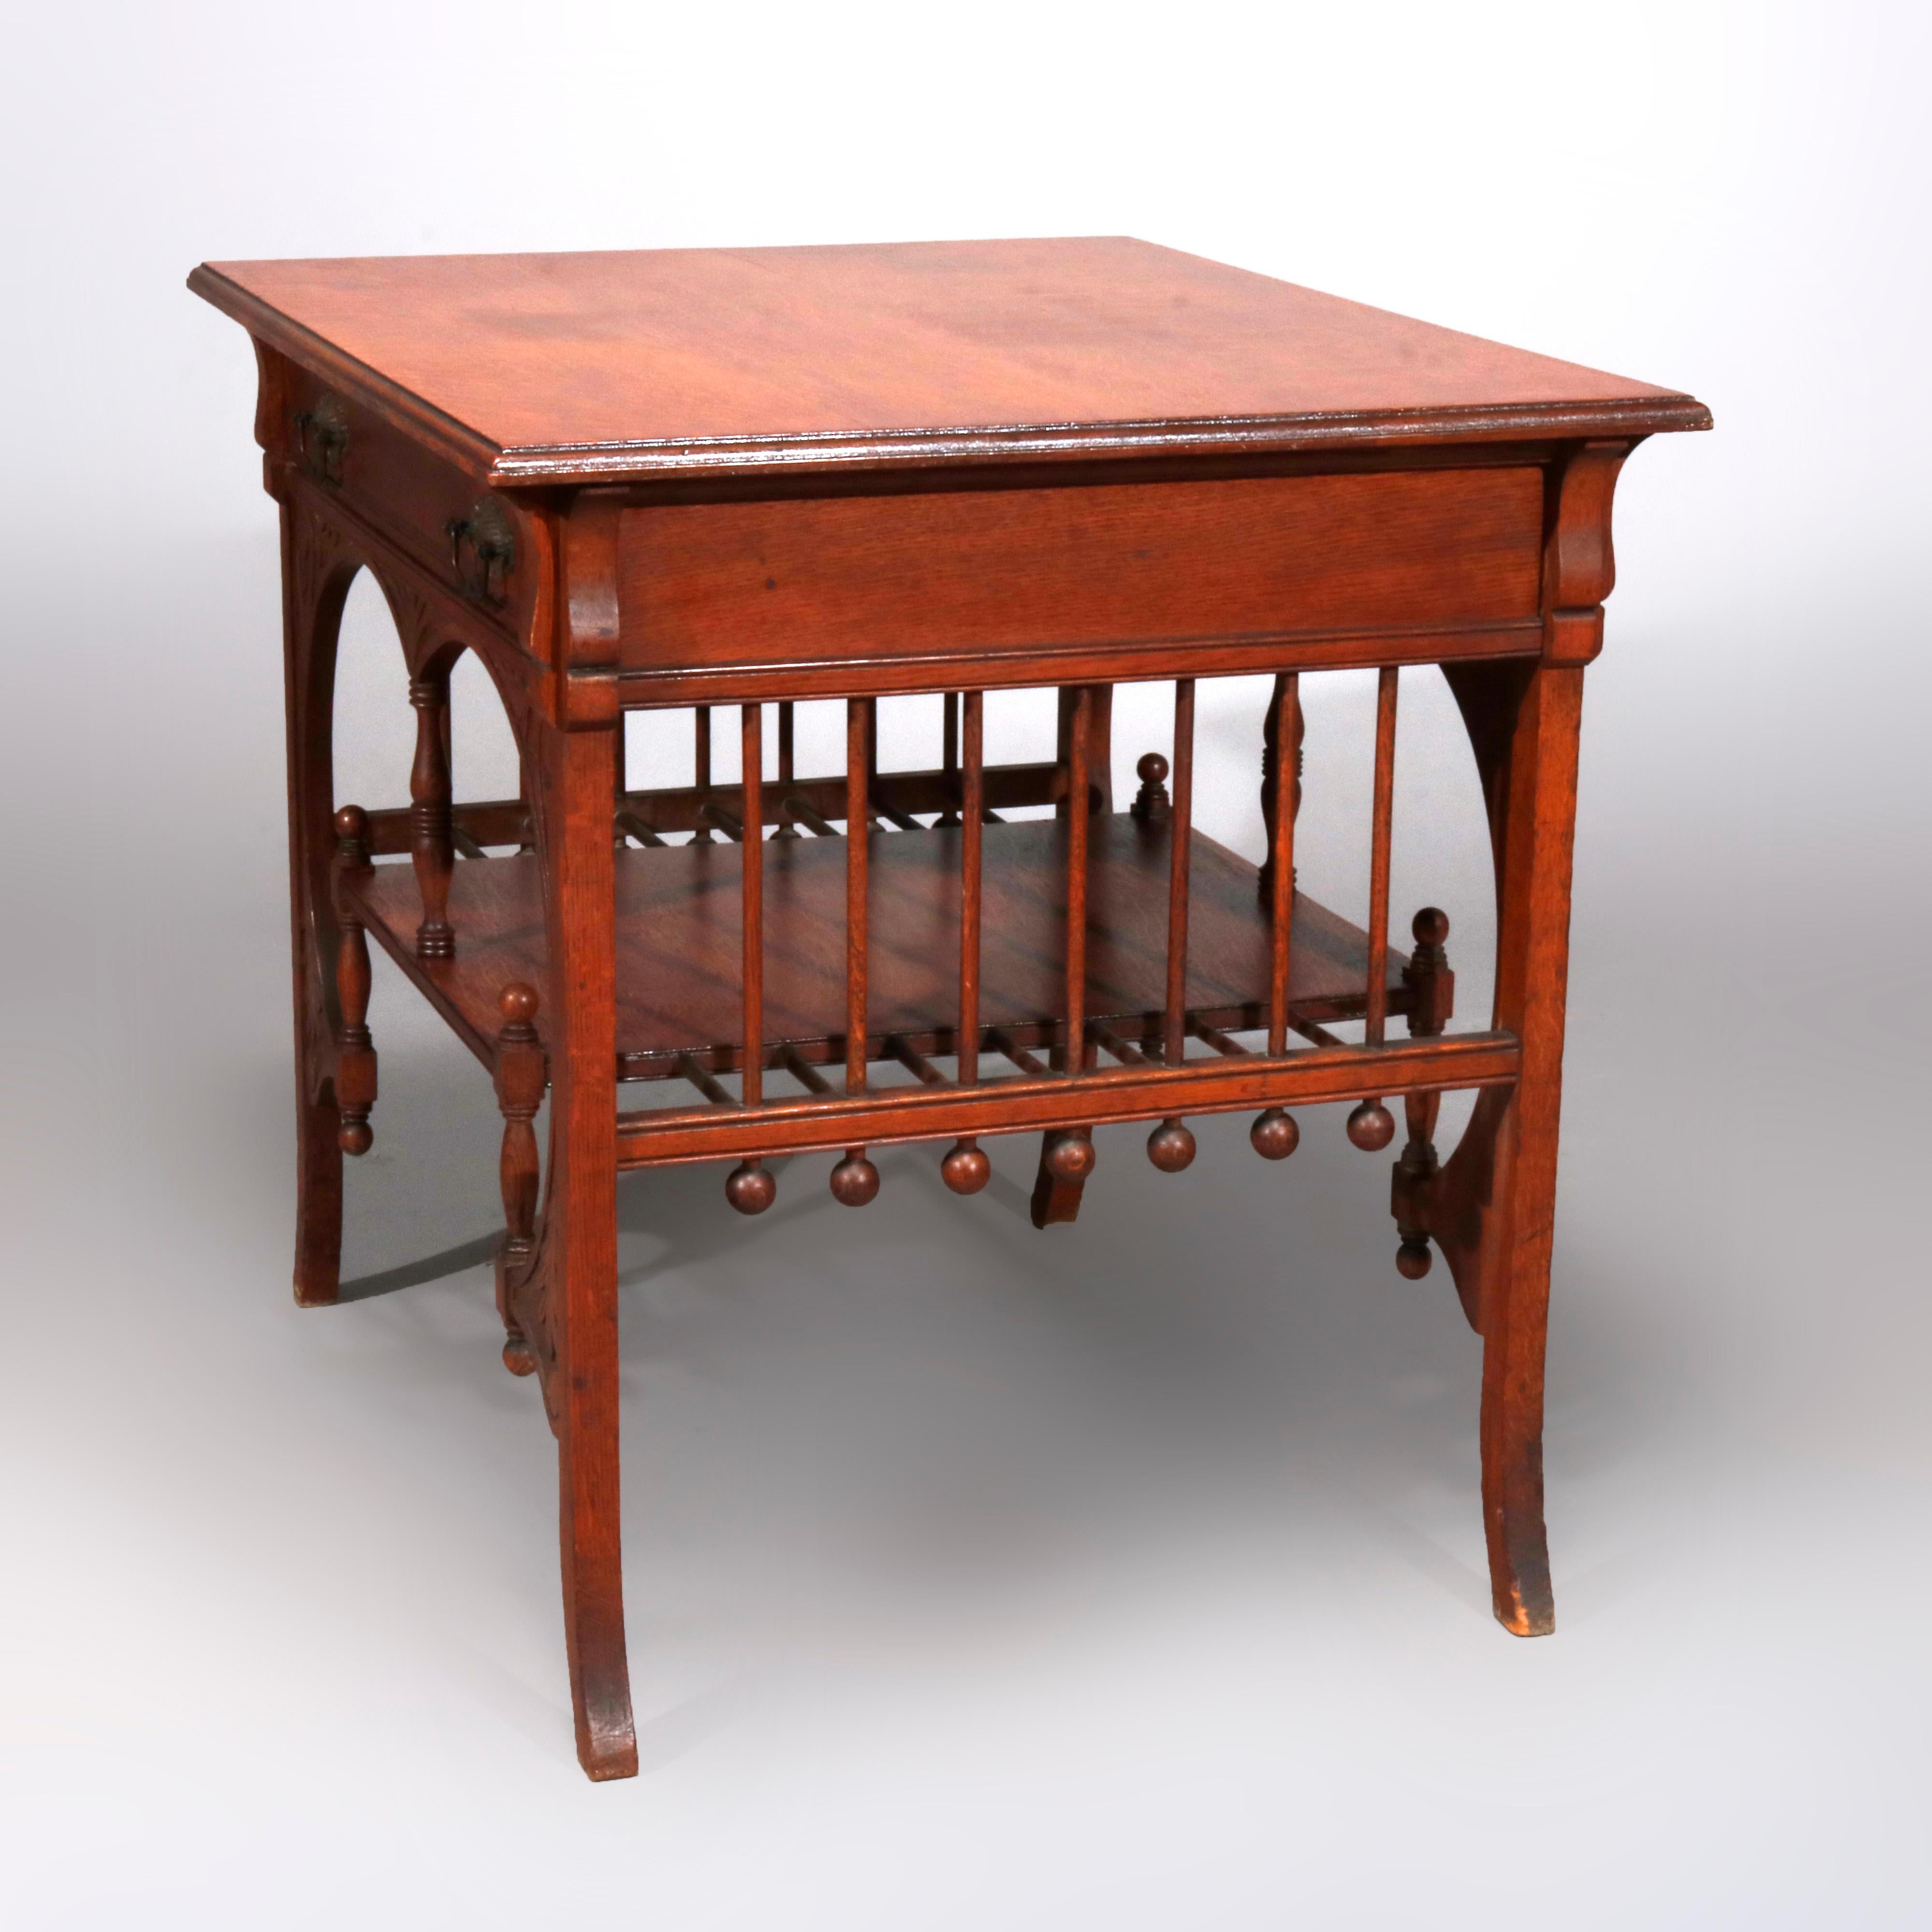 An antique library table in the manner of R J Horner offers oak construction with beveled work surface surmounting base with frieze drawer flanked by corbels having carved foliate decoration, lower shelf supported by stick and ball elements, circa